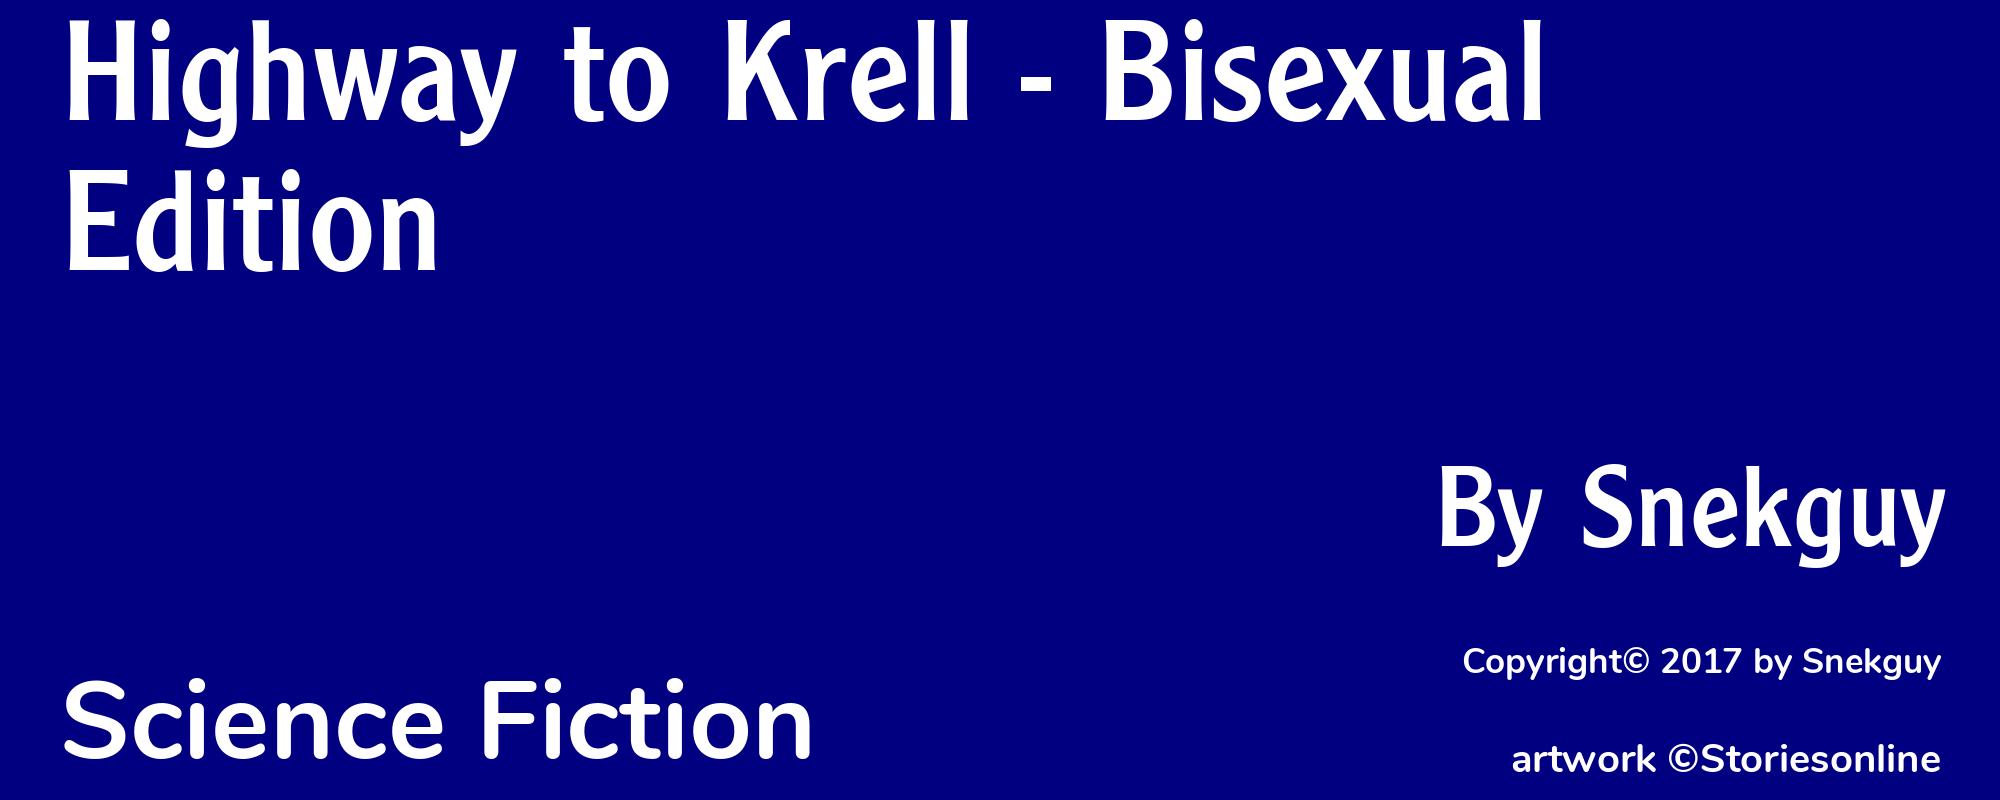 Highway to Krell - Bisexual Edition - Cover